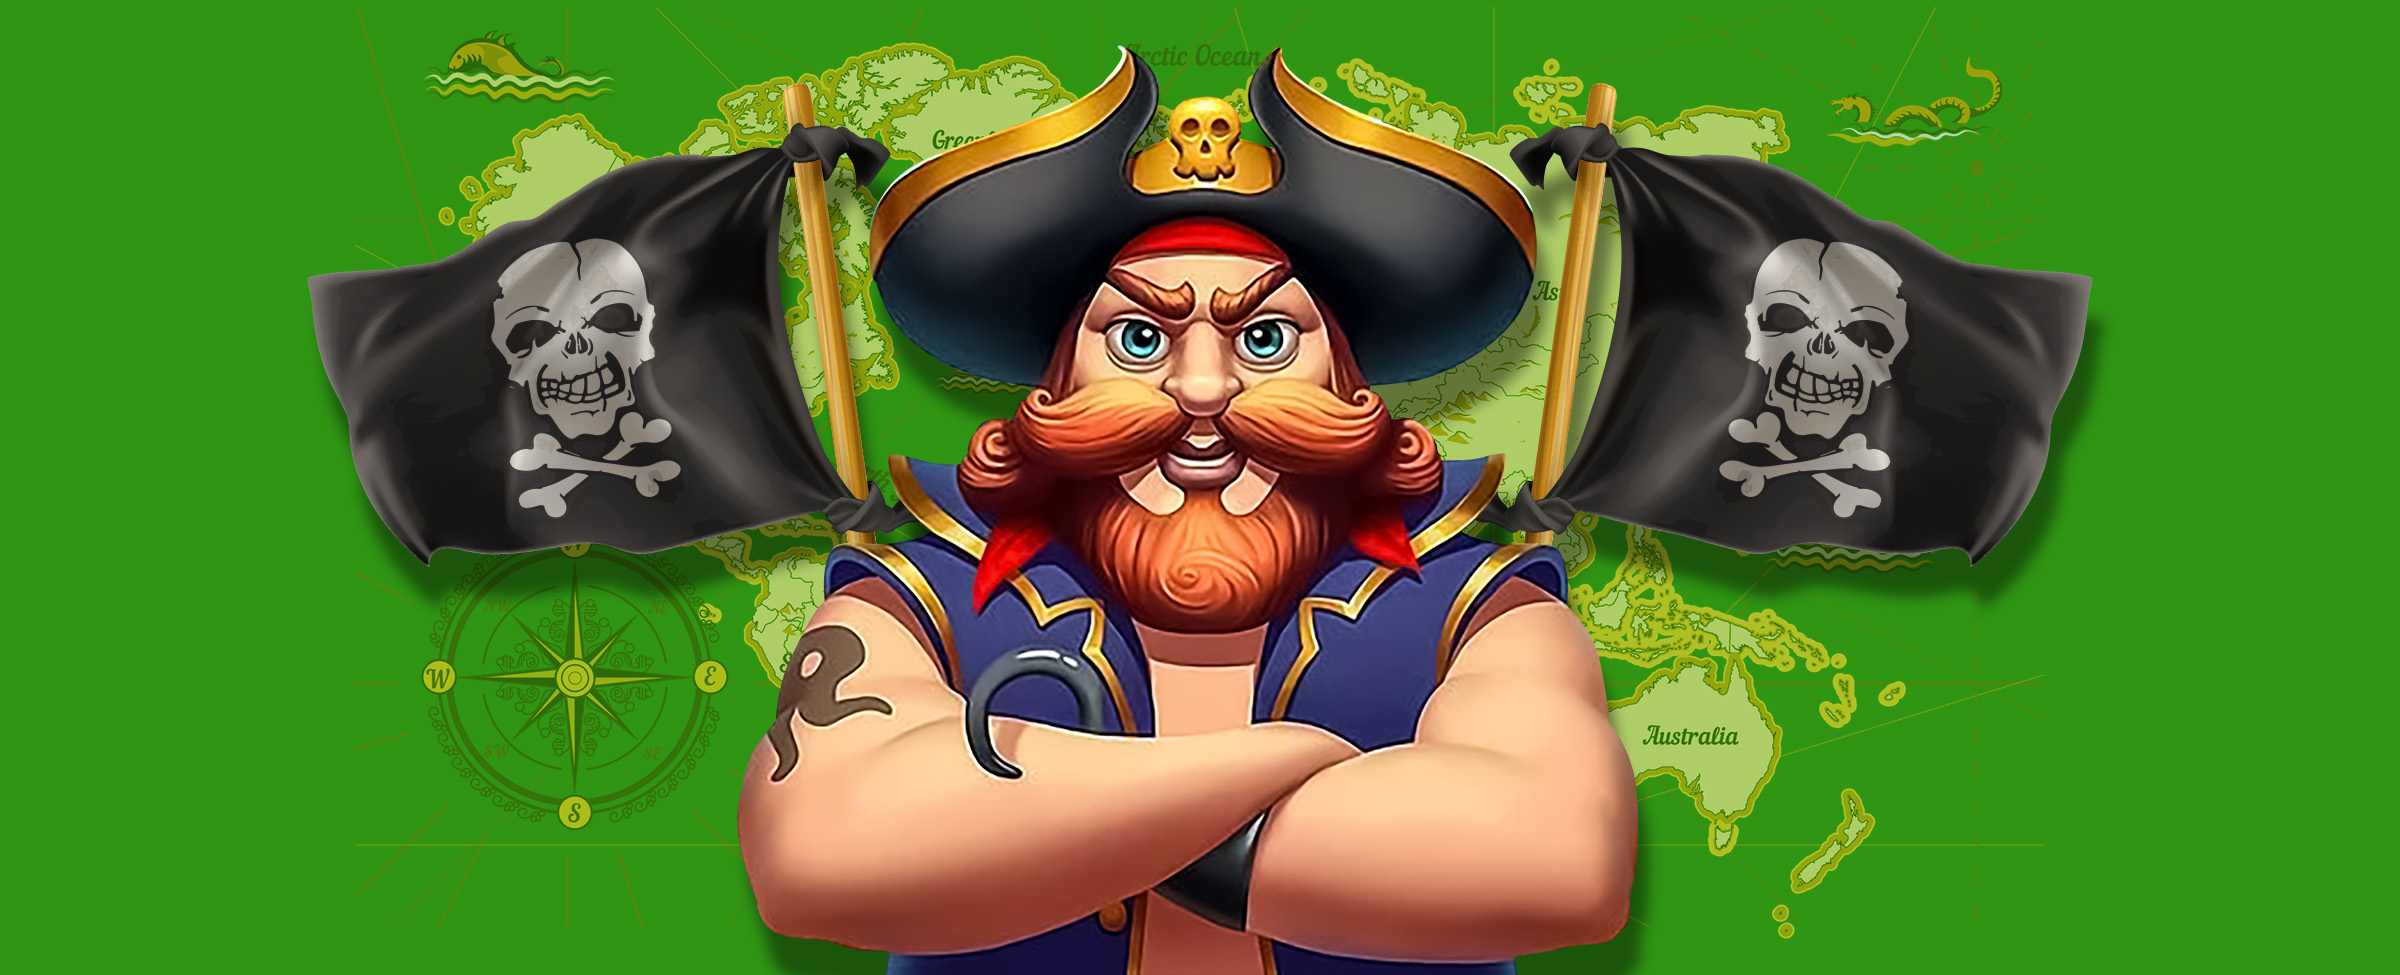 When you play A Pirate’s Quest, you know you’re off the rails and about to have a helluva good time! Try this game on for size - we know you won’t regret it.